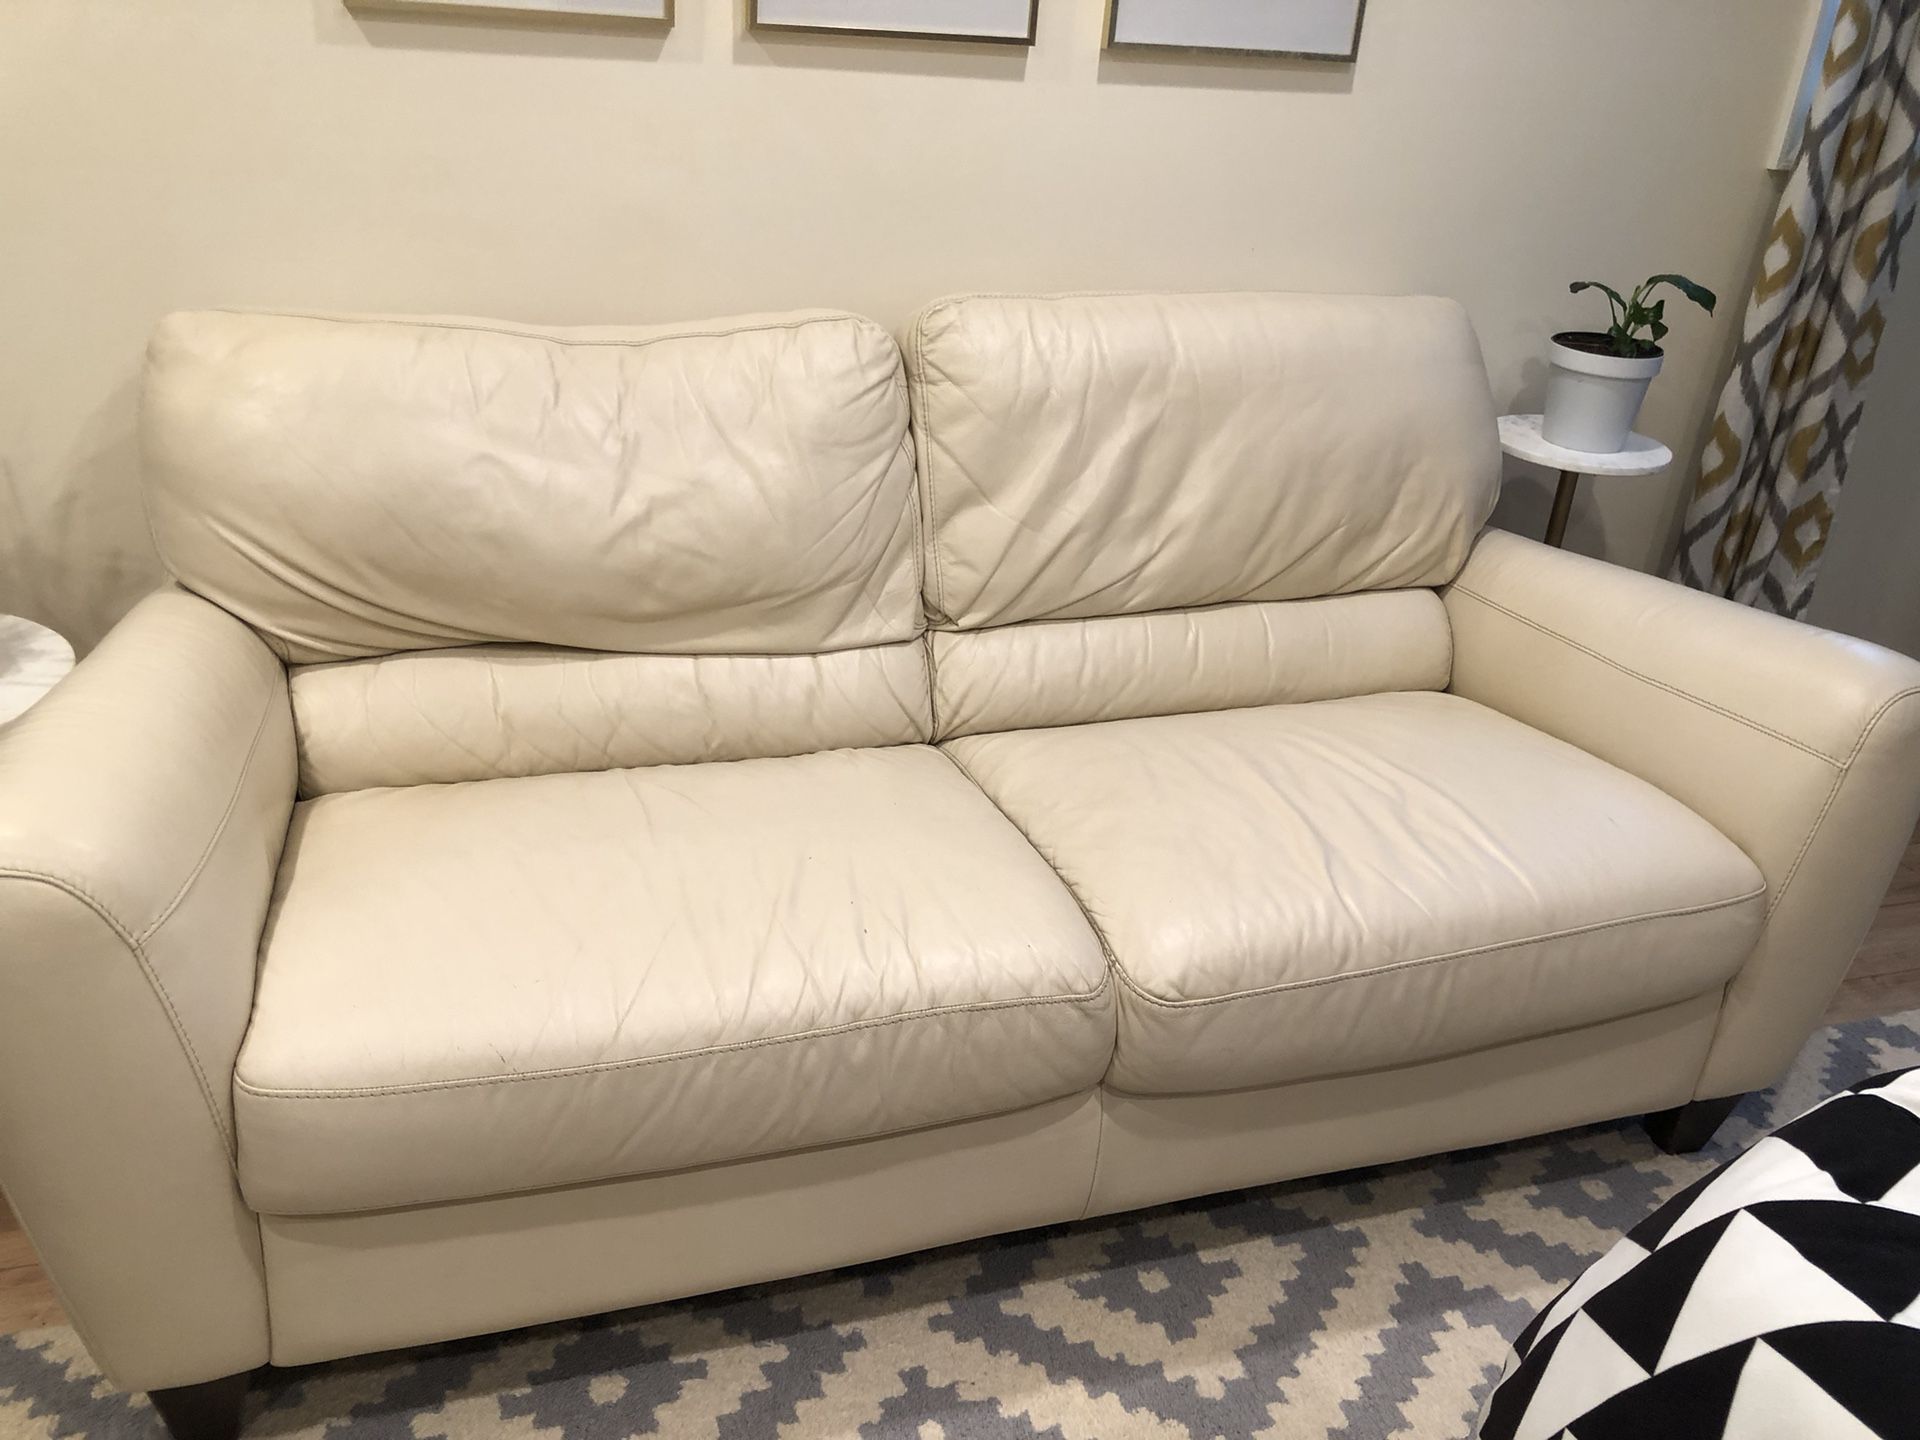 2 Leather Sofas From Macy’s 